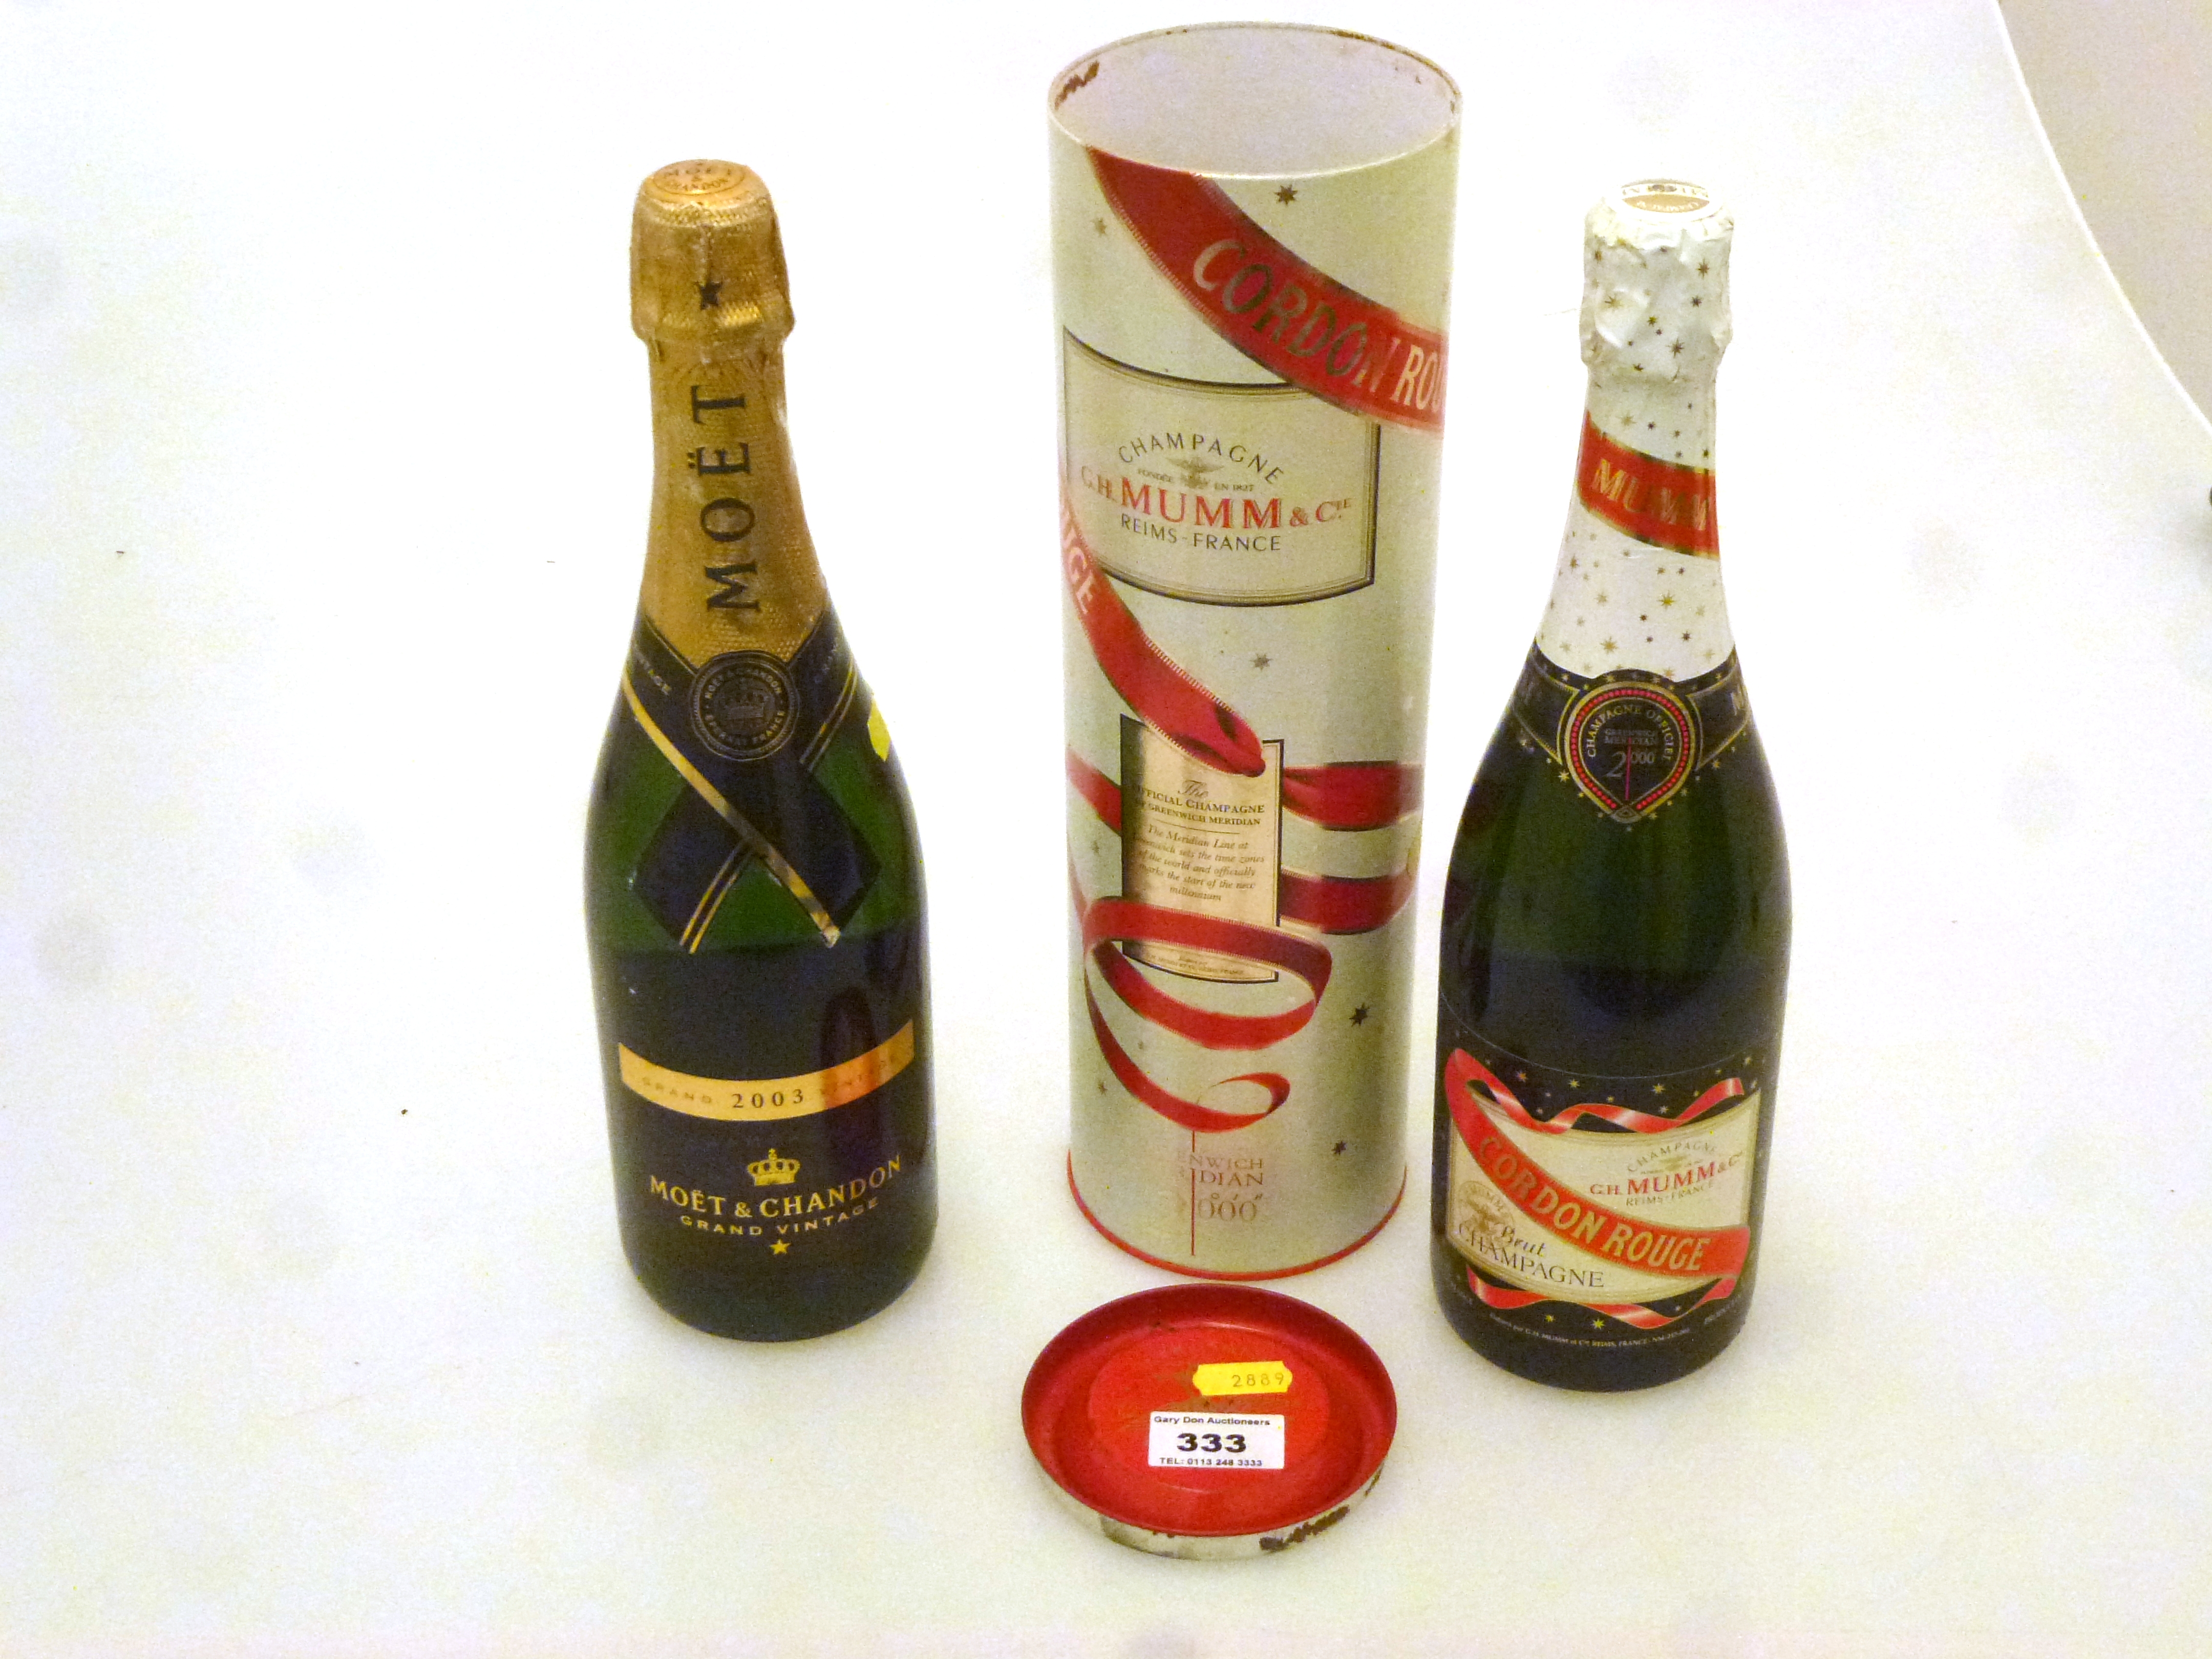 BOTTLE OF 2003 MOET AND CHANDON GRAND VINTAGE CHAMPAGNE AND A BOXED BOTTLE OF G.H. MUMM AND CIE - Image 3 of 7